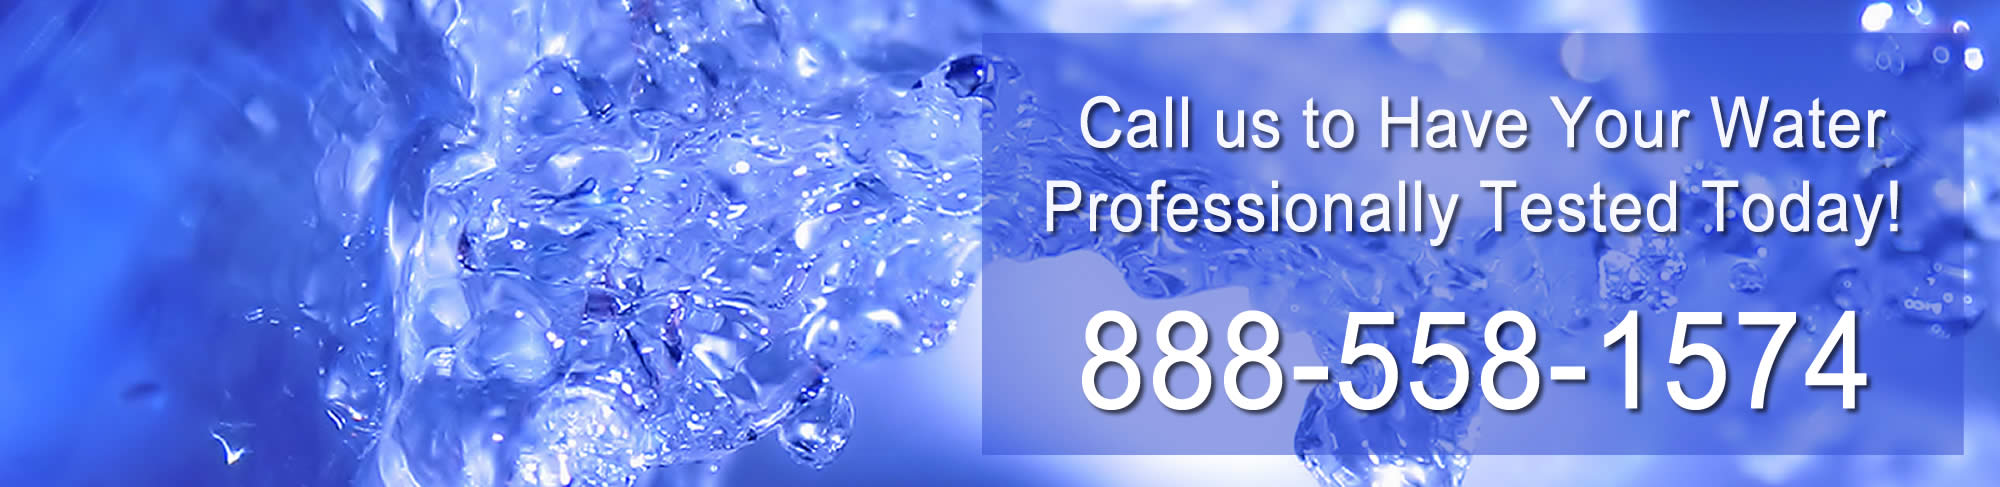 Specializing in New Canaan CT Water Testing and Analysis